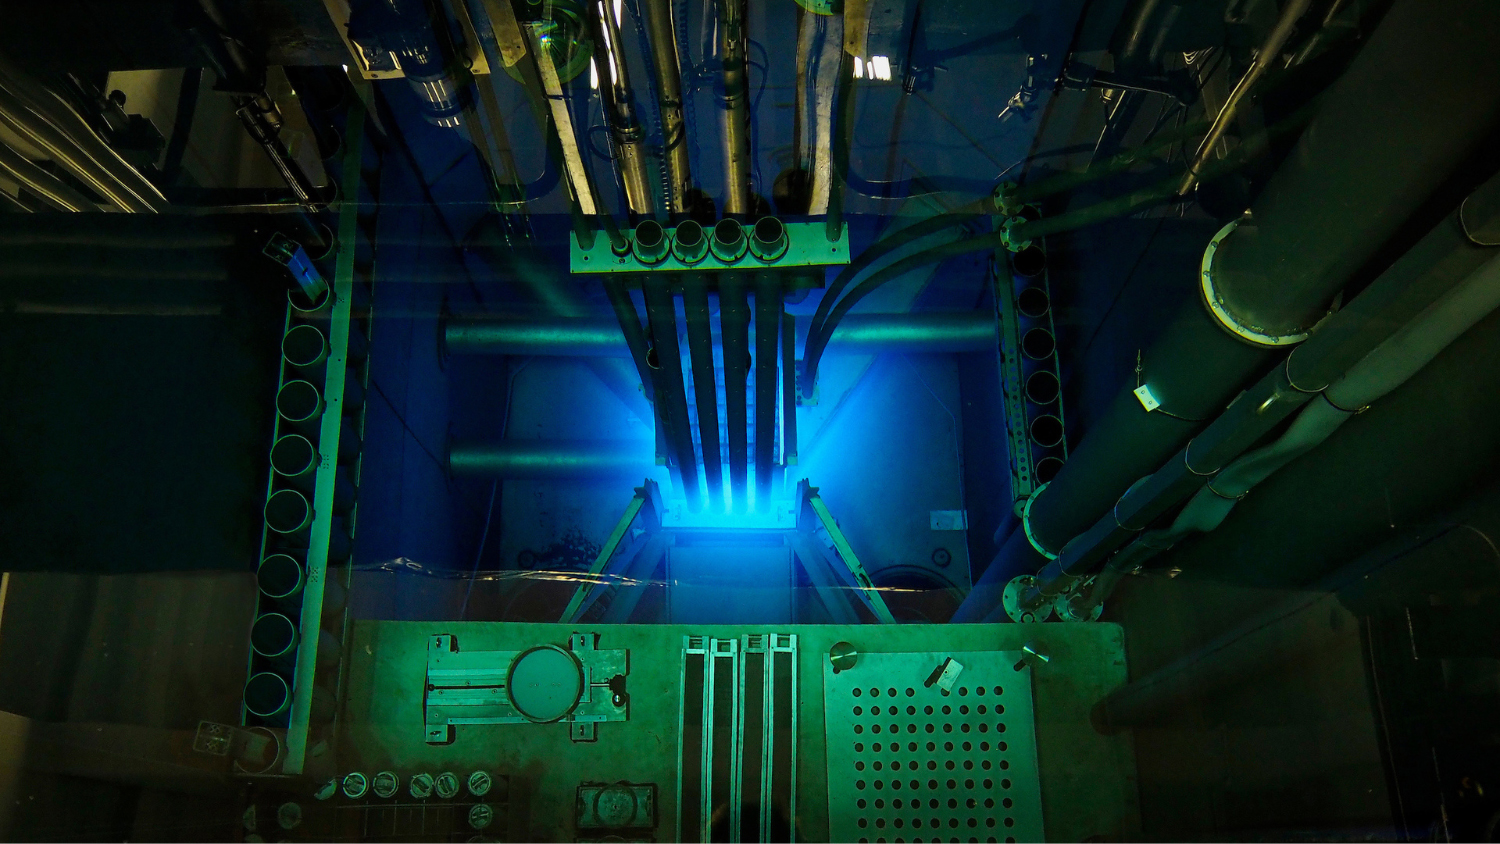 A view inside of the NC State PULSTAR nuclear reactor. Rods are in blue with the surrounding parts in green.